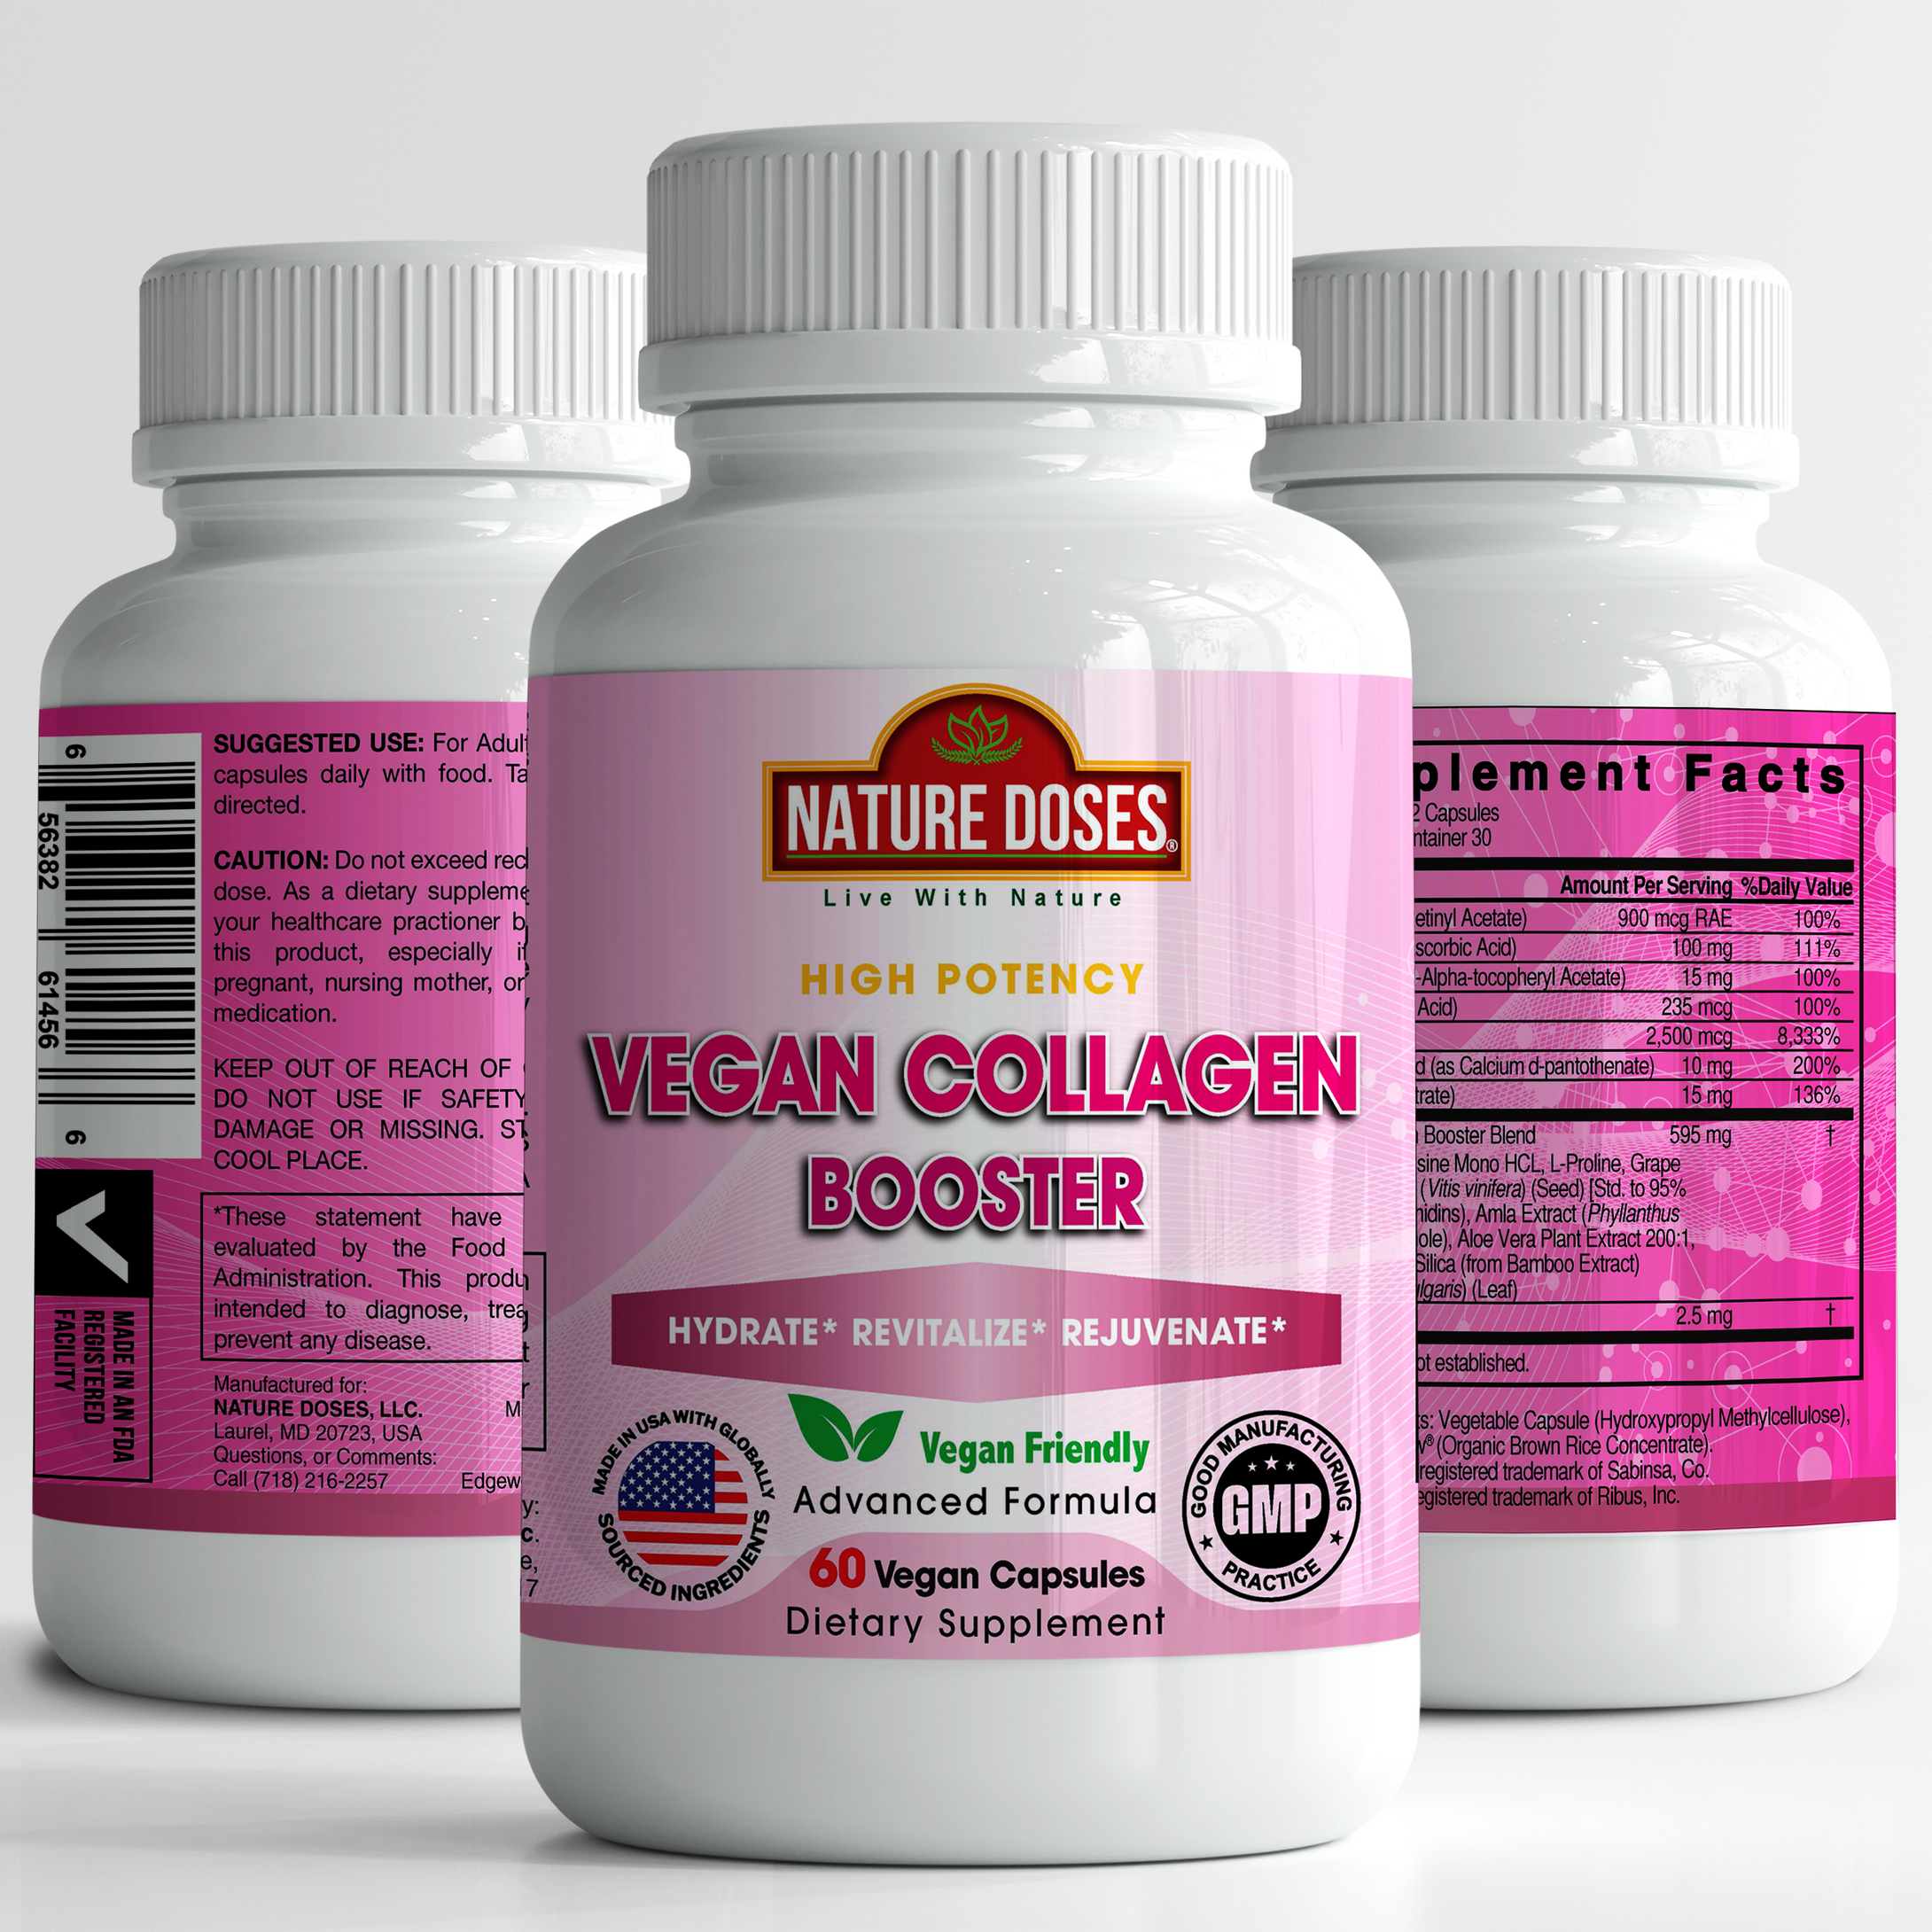 NATURE DOSES Vegan Collagen Booster supplement -Supports Skin, Hair, and Nail Health - Vegan Collagen Builder with Silica, Biotin, Super Berry Amla, Vitamin C and Resveratrol - 60 Protein Capsules